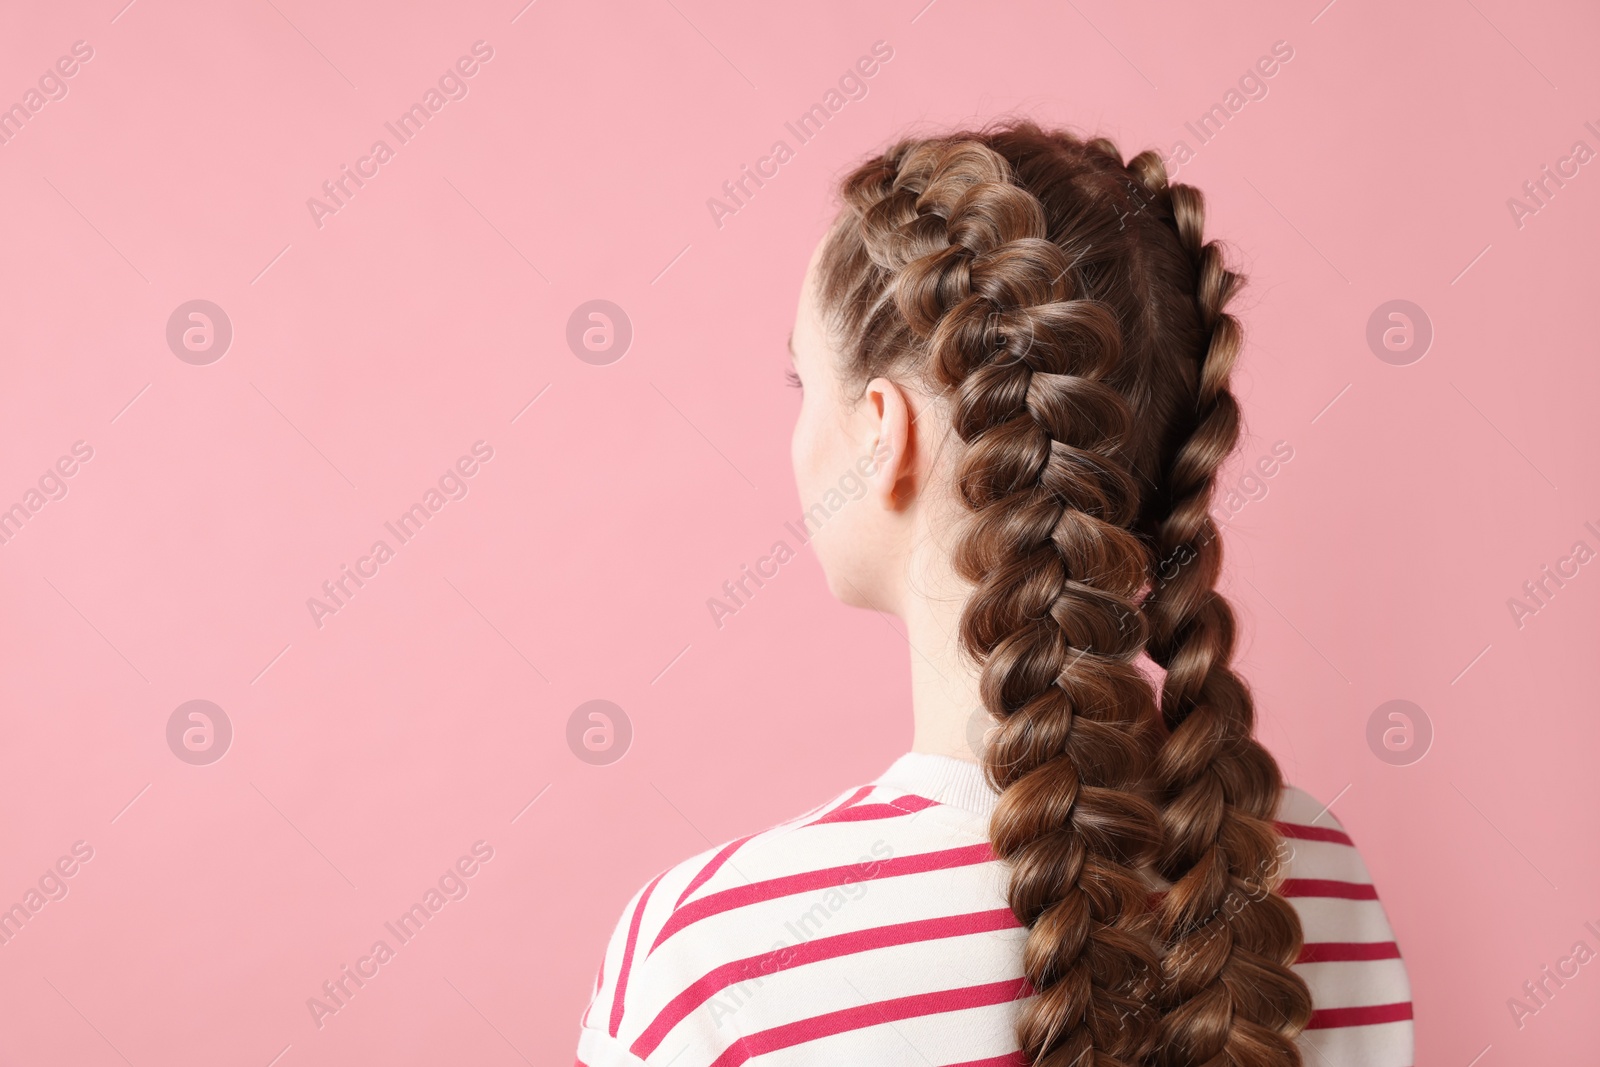 Photo of Woman with braided hair on pink background